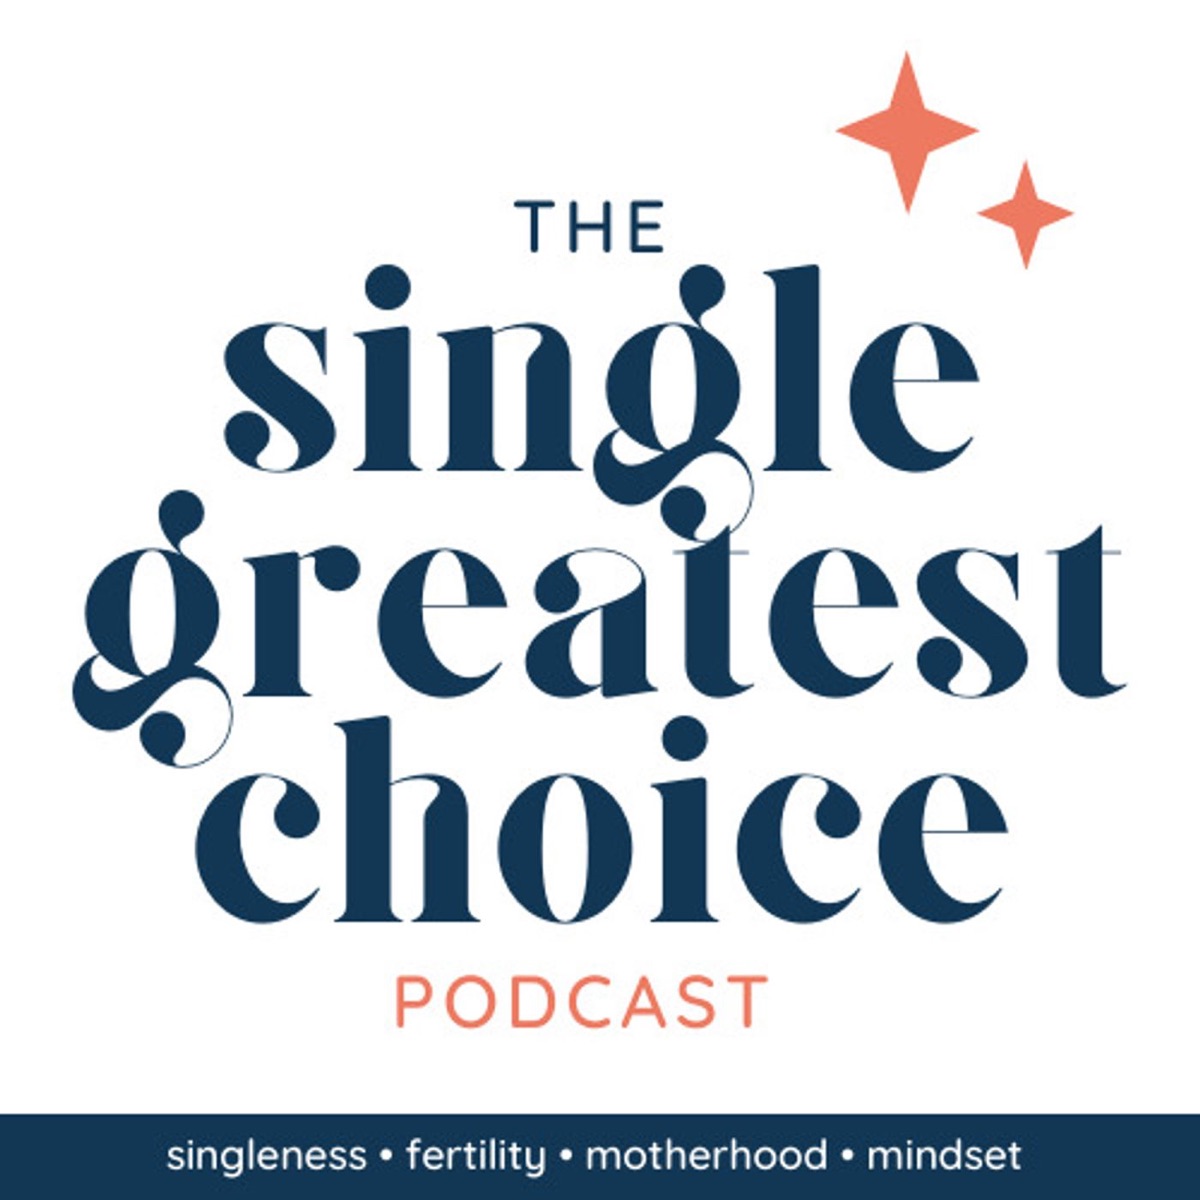 The Single Greatest Choice – Podcast – Podtail